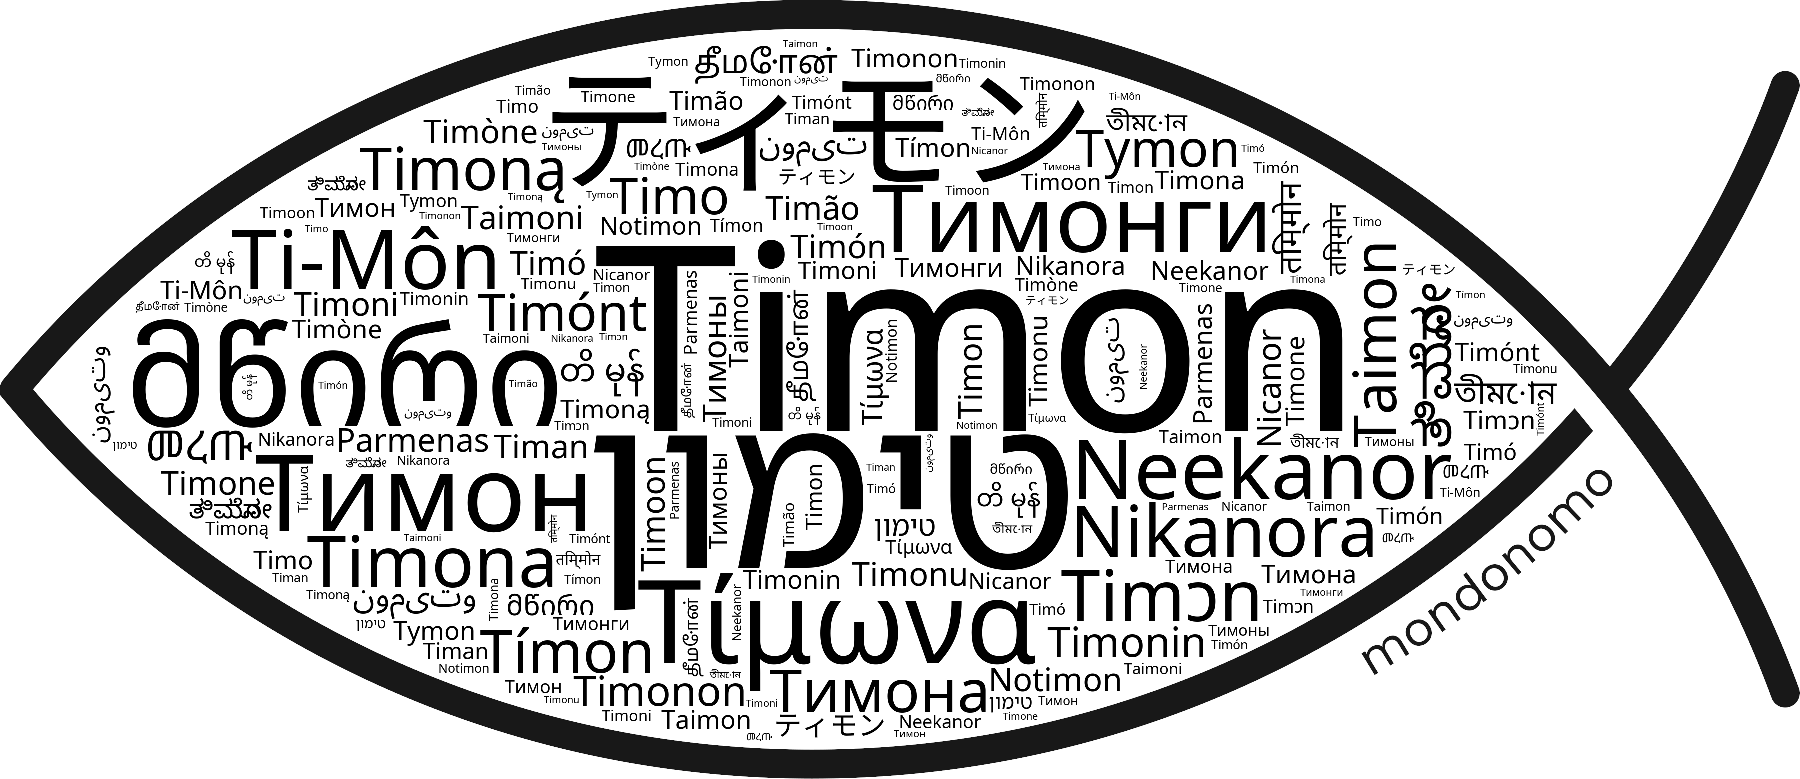 Name Timon in the world's Bibles